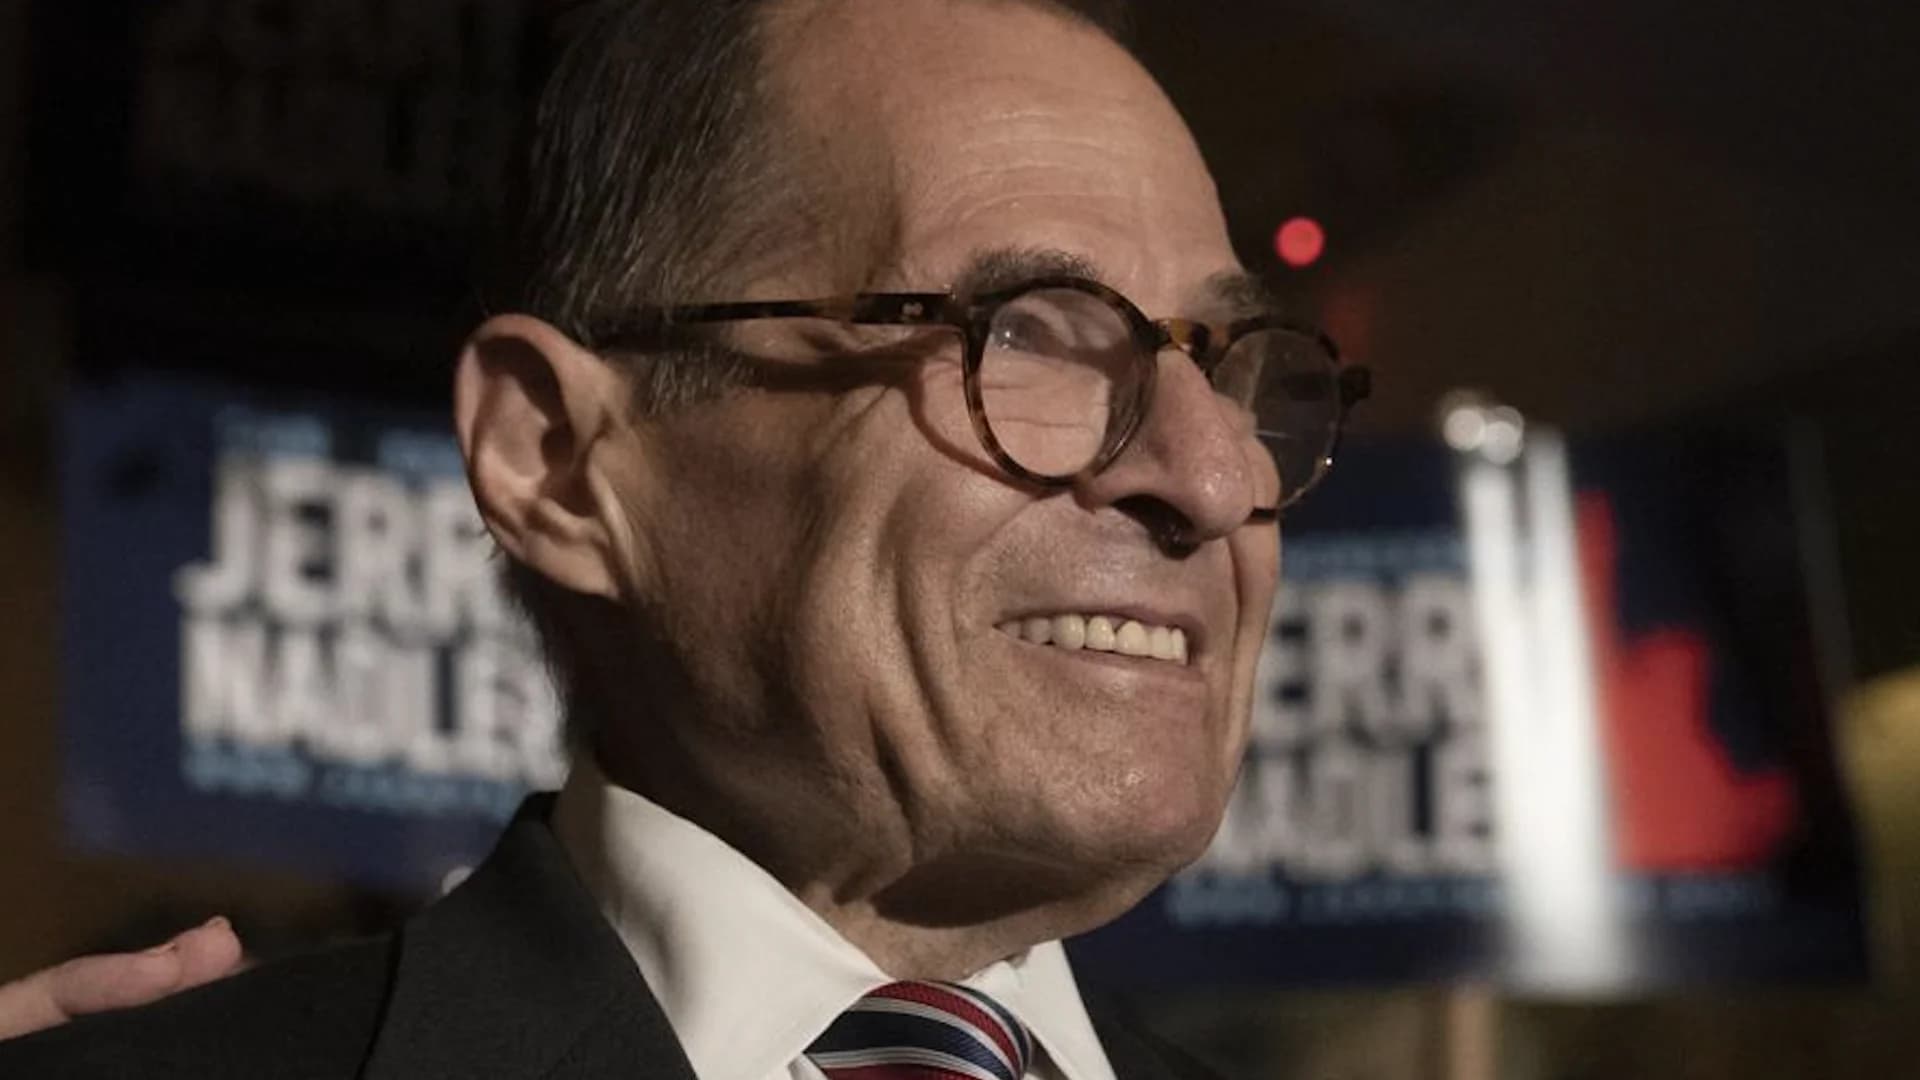 Nadler defeats Maloney in battle of top House Democrats